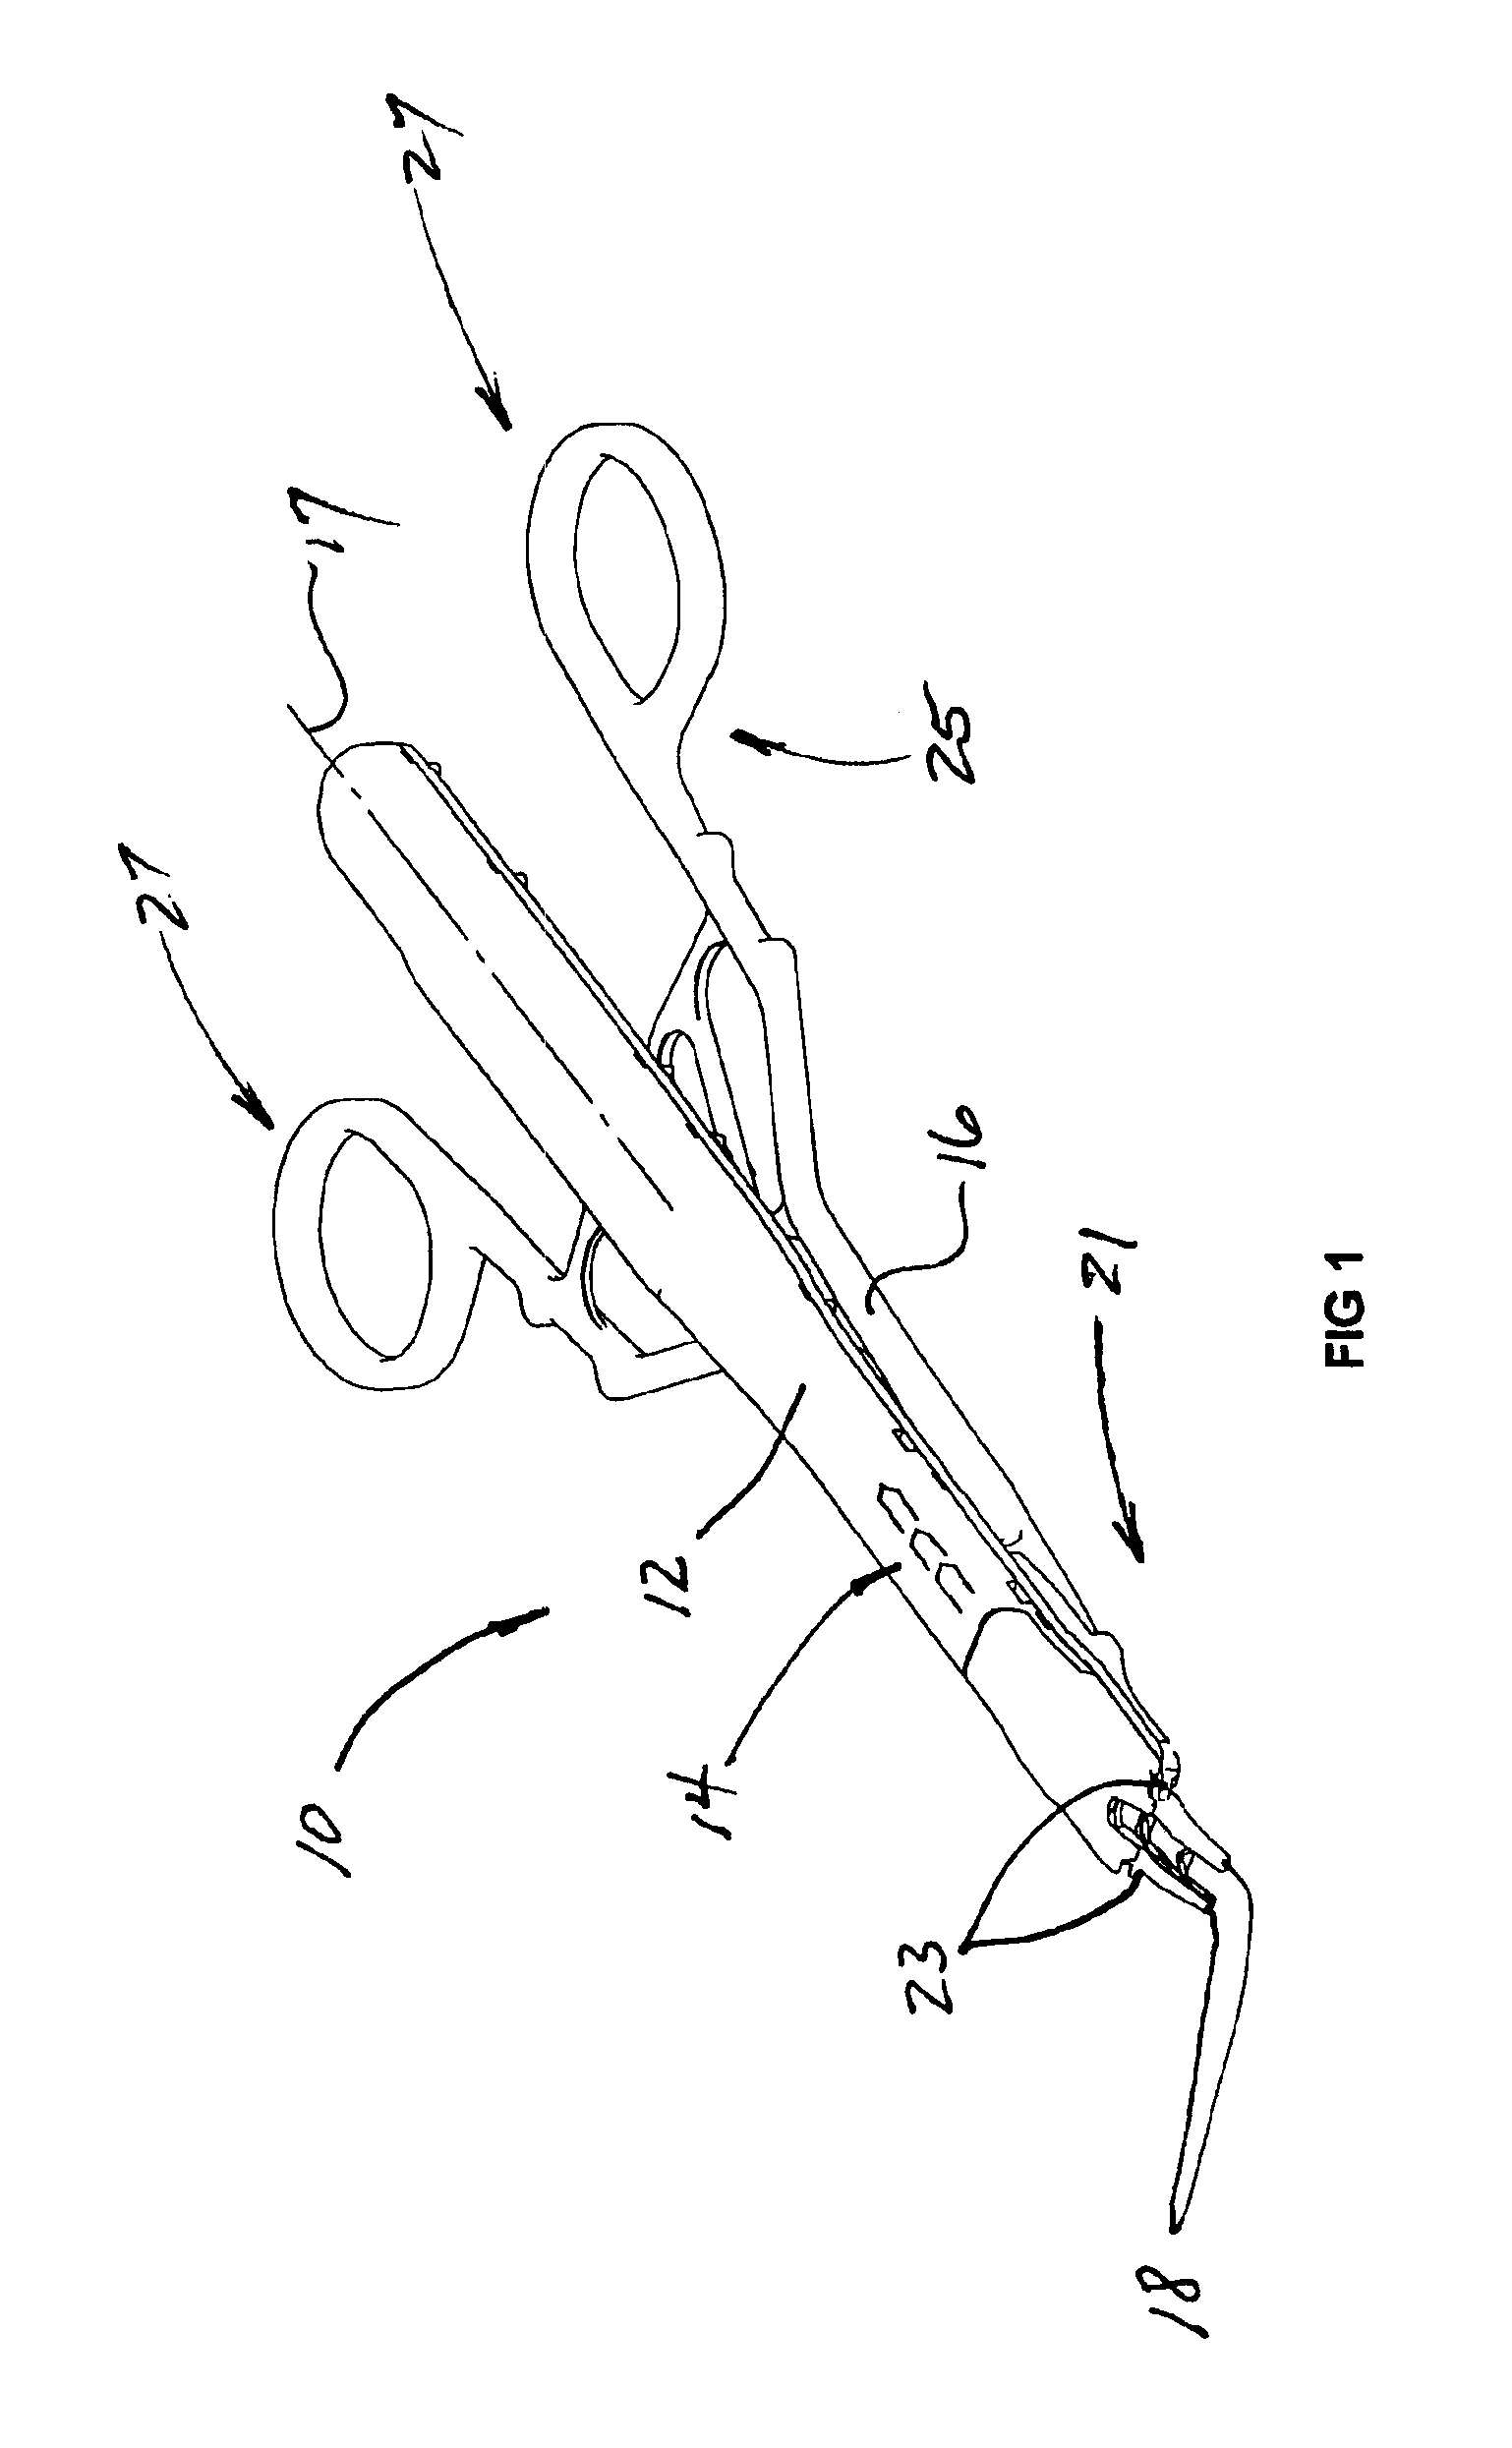 Surgical instrument with improved handle assembly